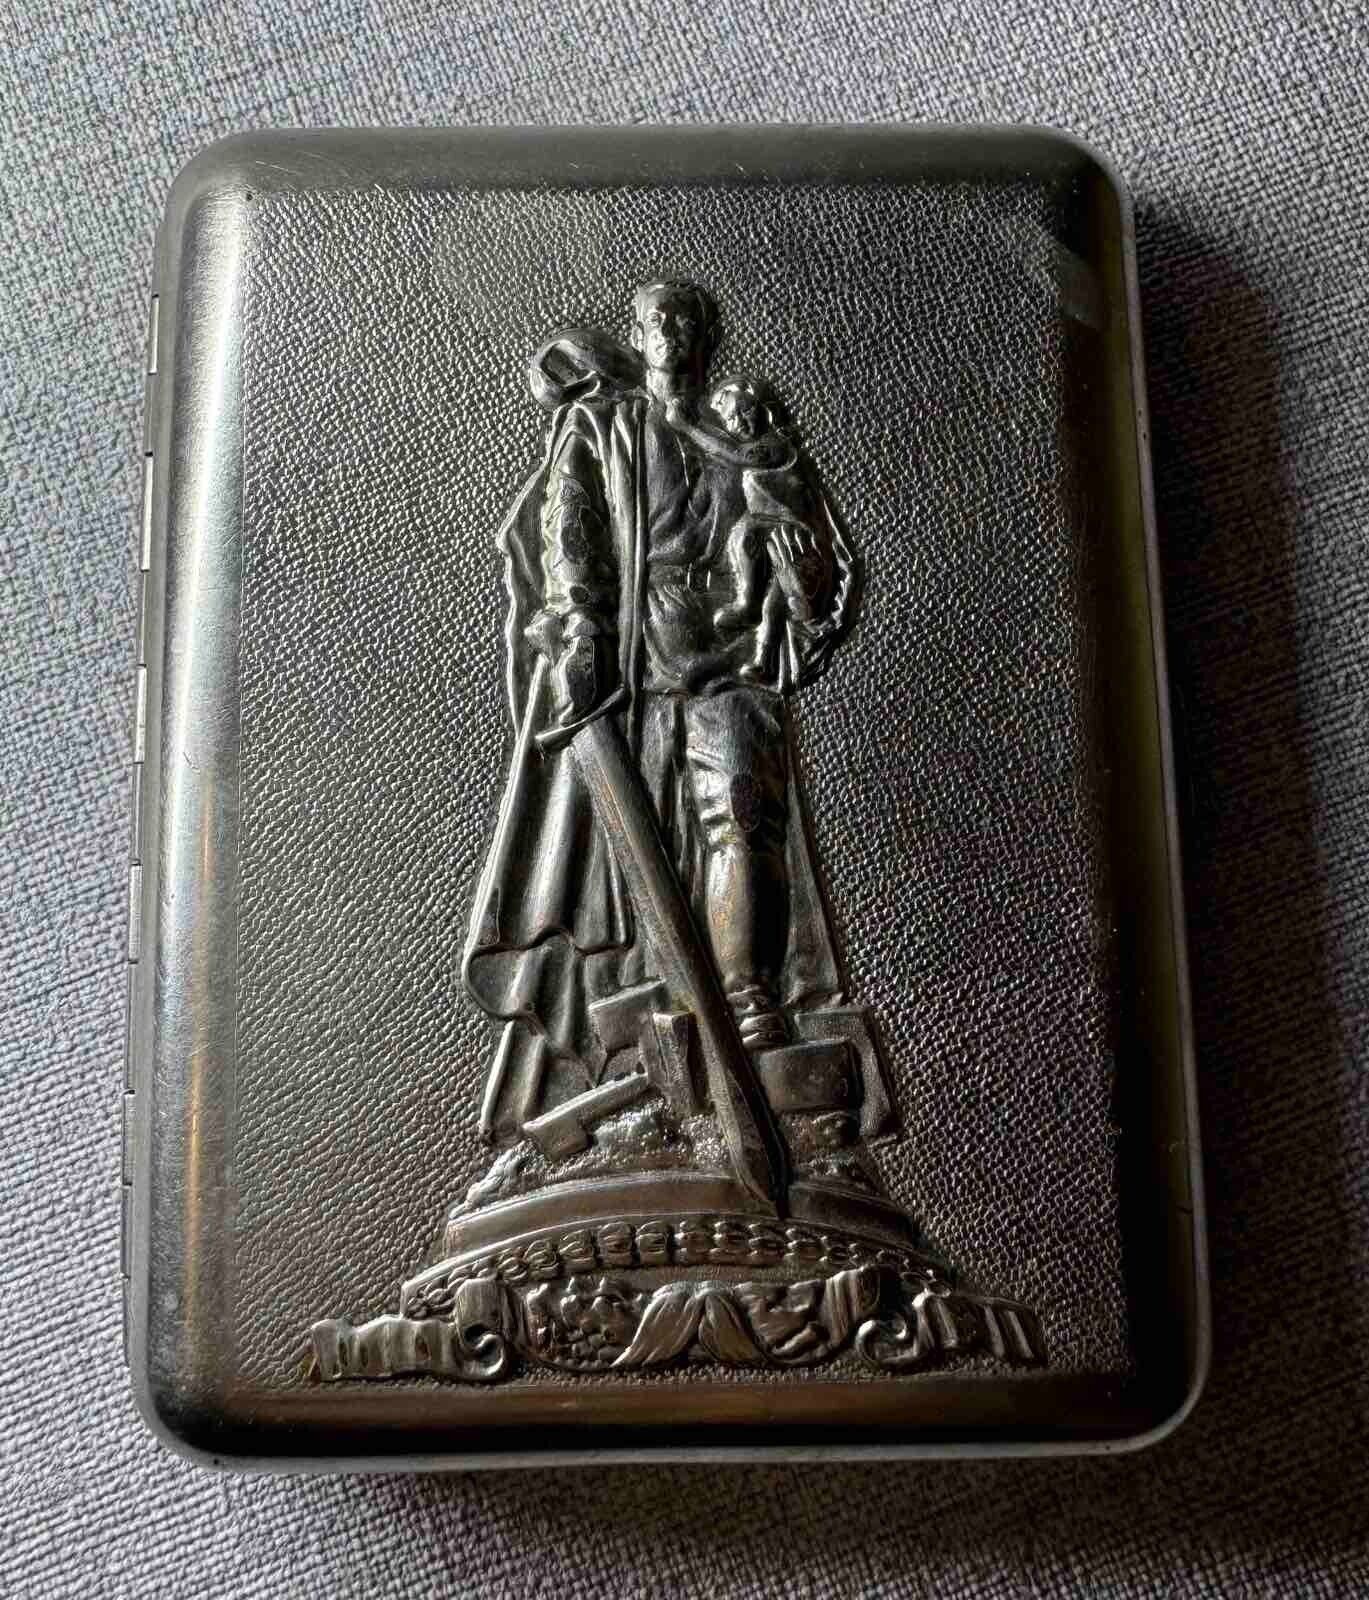 Vintage 1960s USSR Box Case Cigarette Metal Silver Plated Collectibles Gift